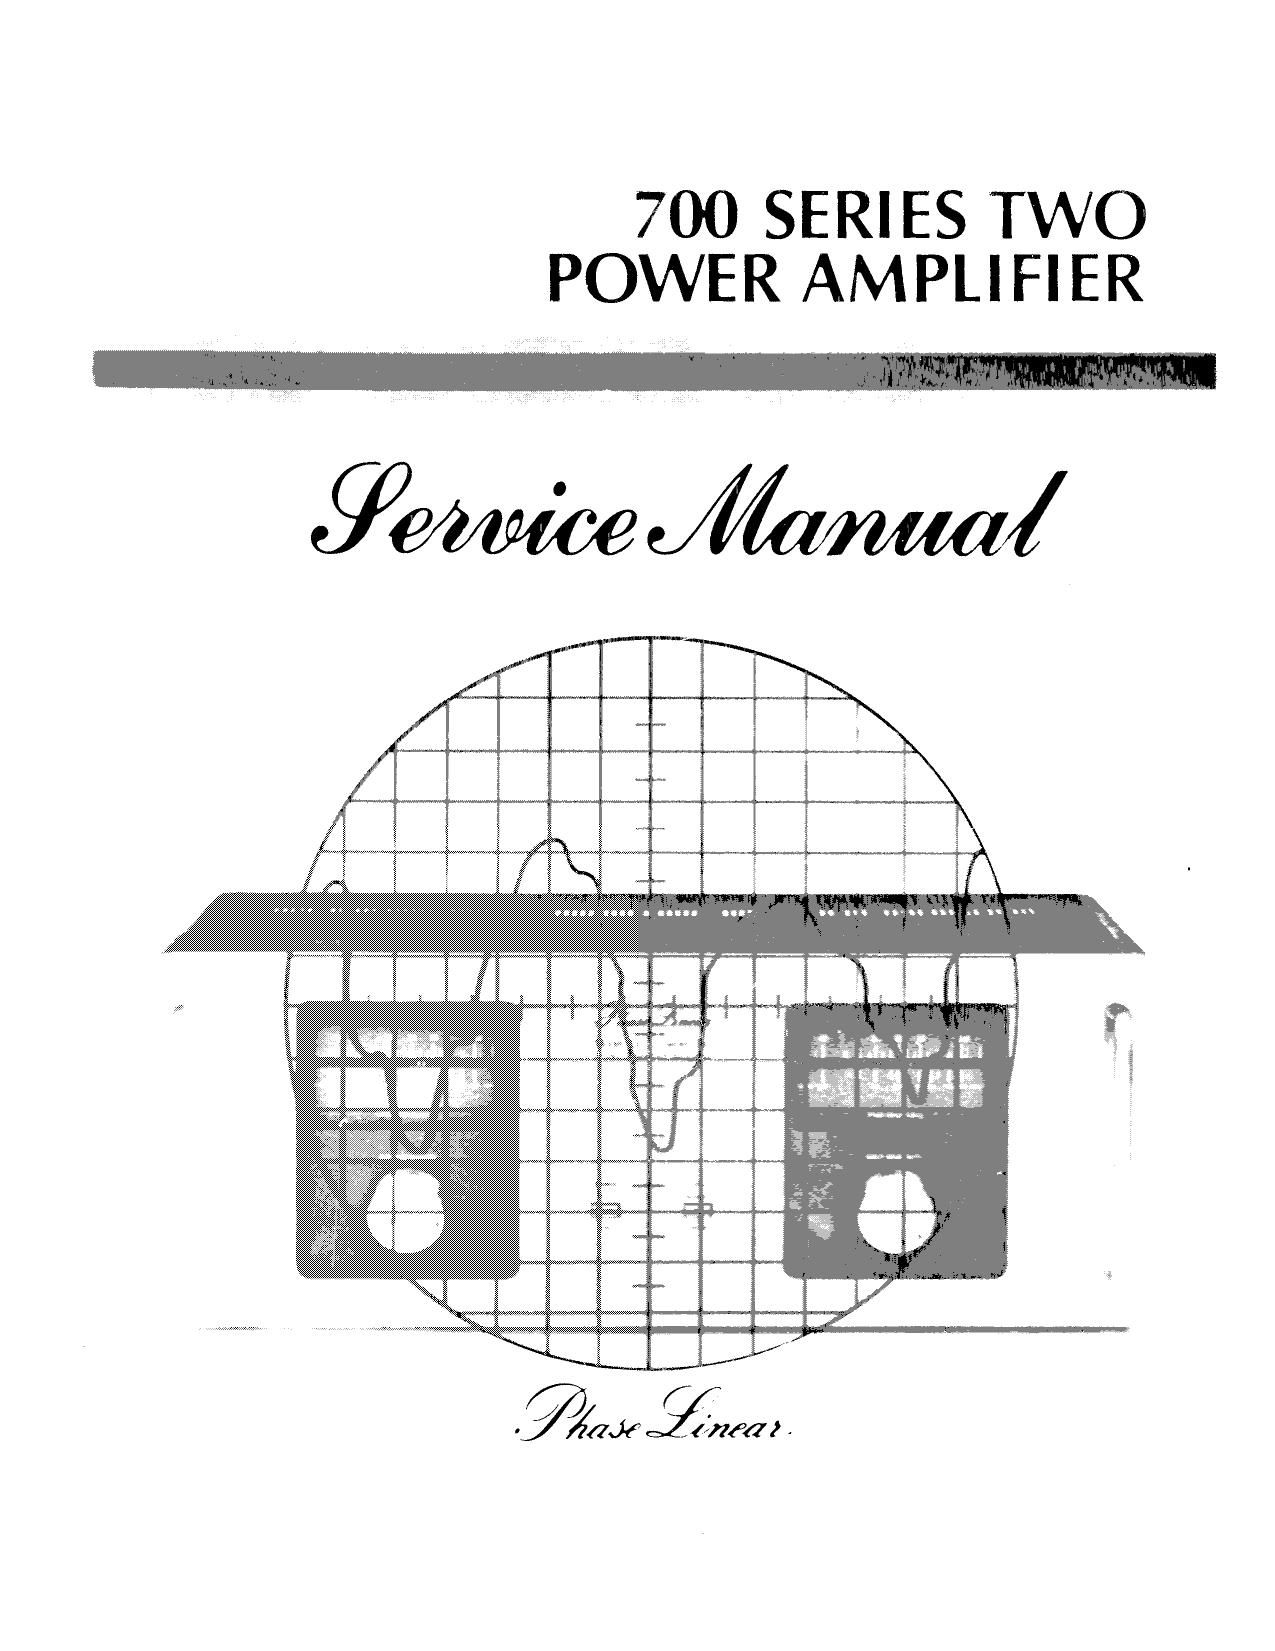 Phase Linear 700 S2 Service Manual